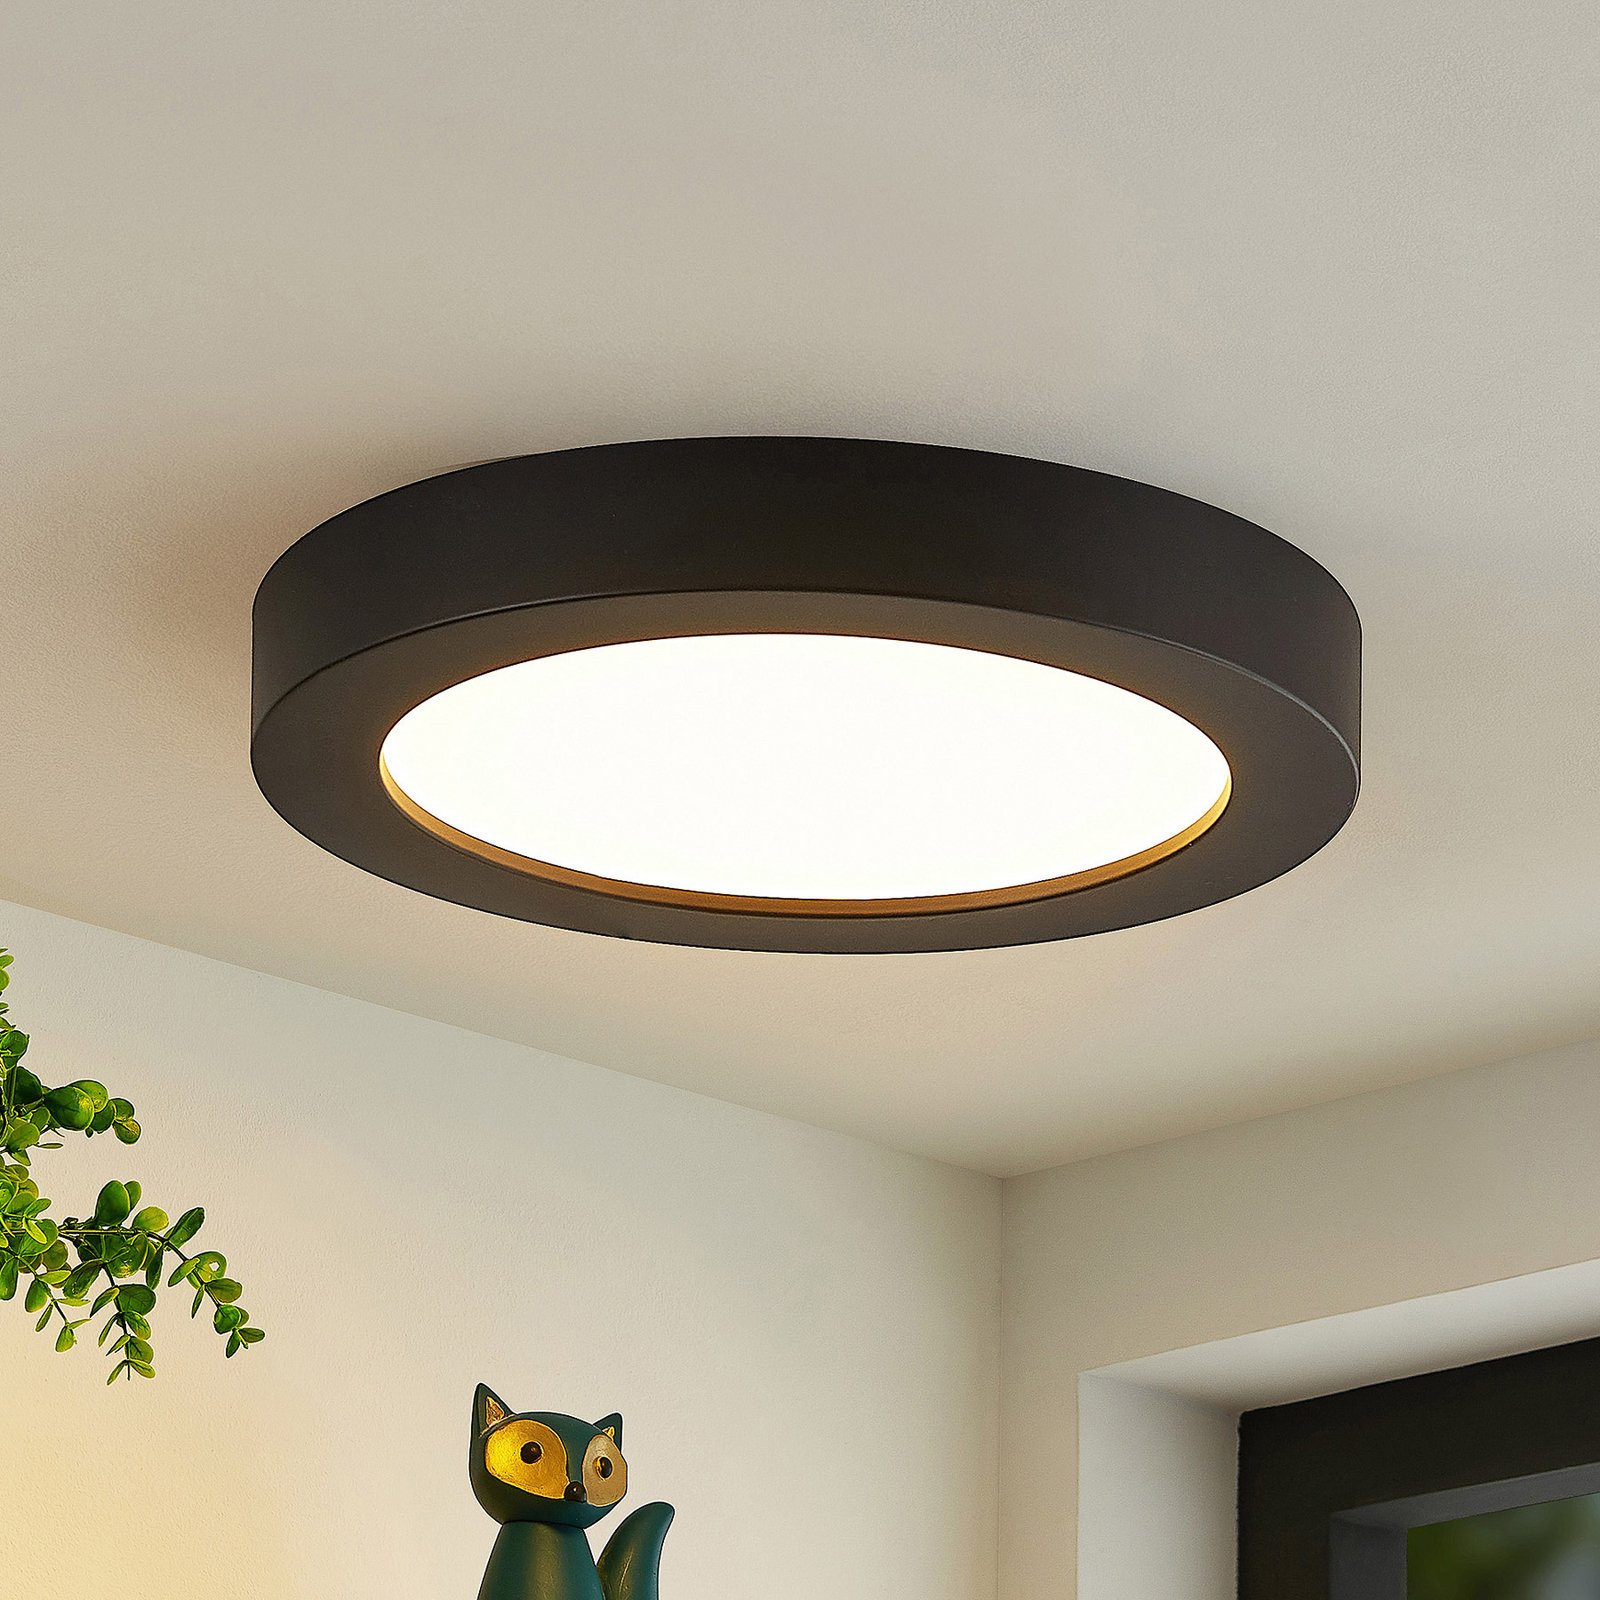 Prios LED ceiling lamp Edwina, black, 22.6 cm, CCT, dimmable